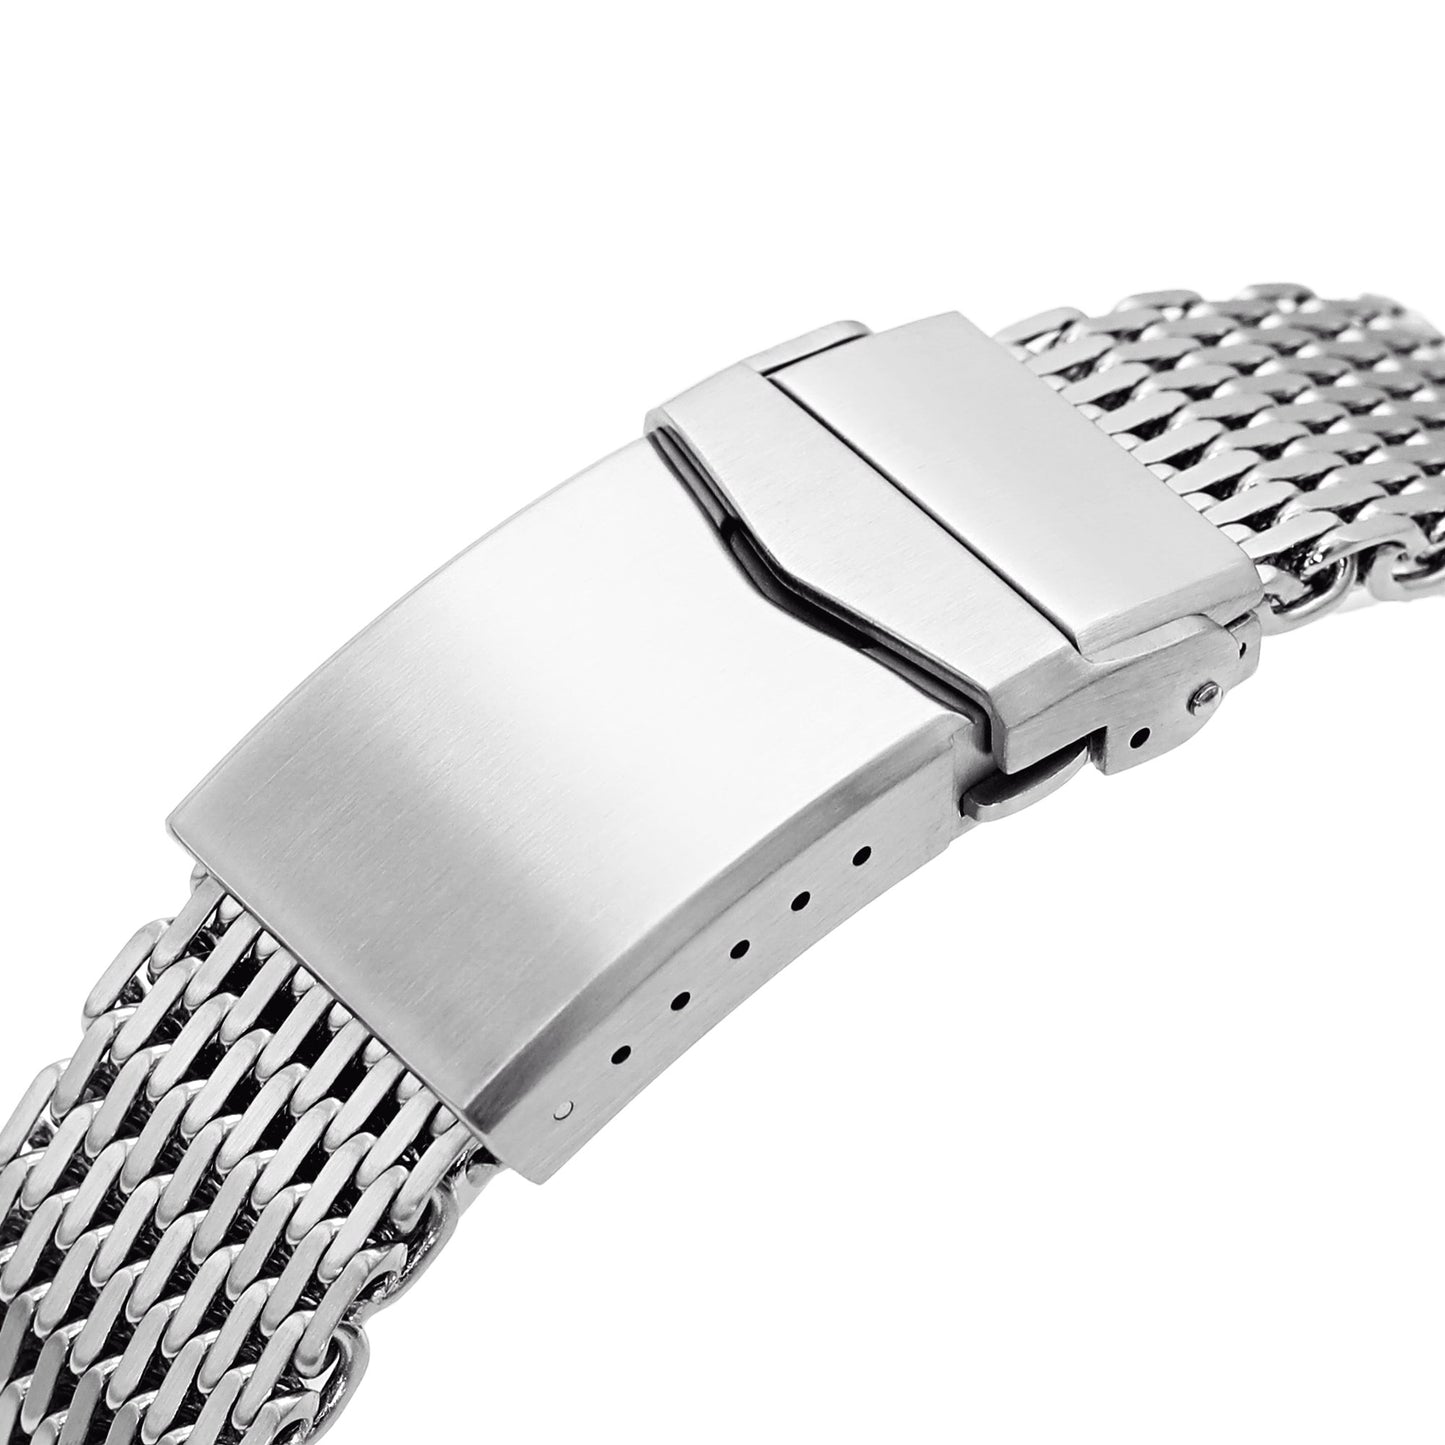 20mm Brushed Tapered Winghead "SHARK" Mesh watch band, V-Clasp